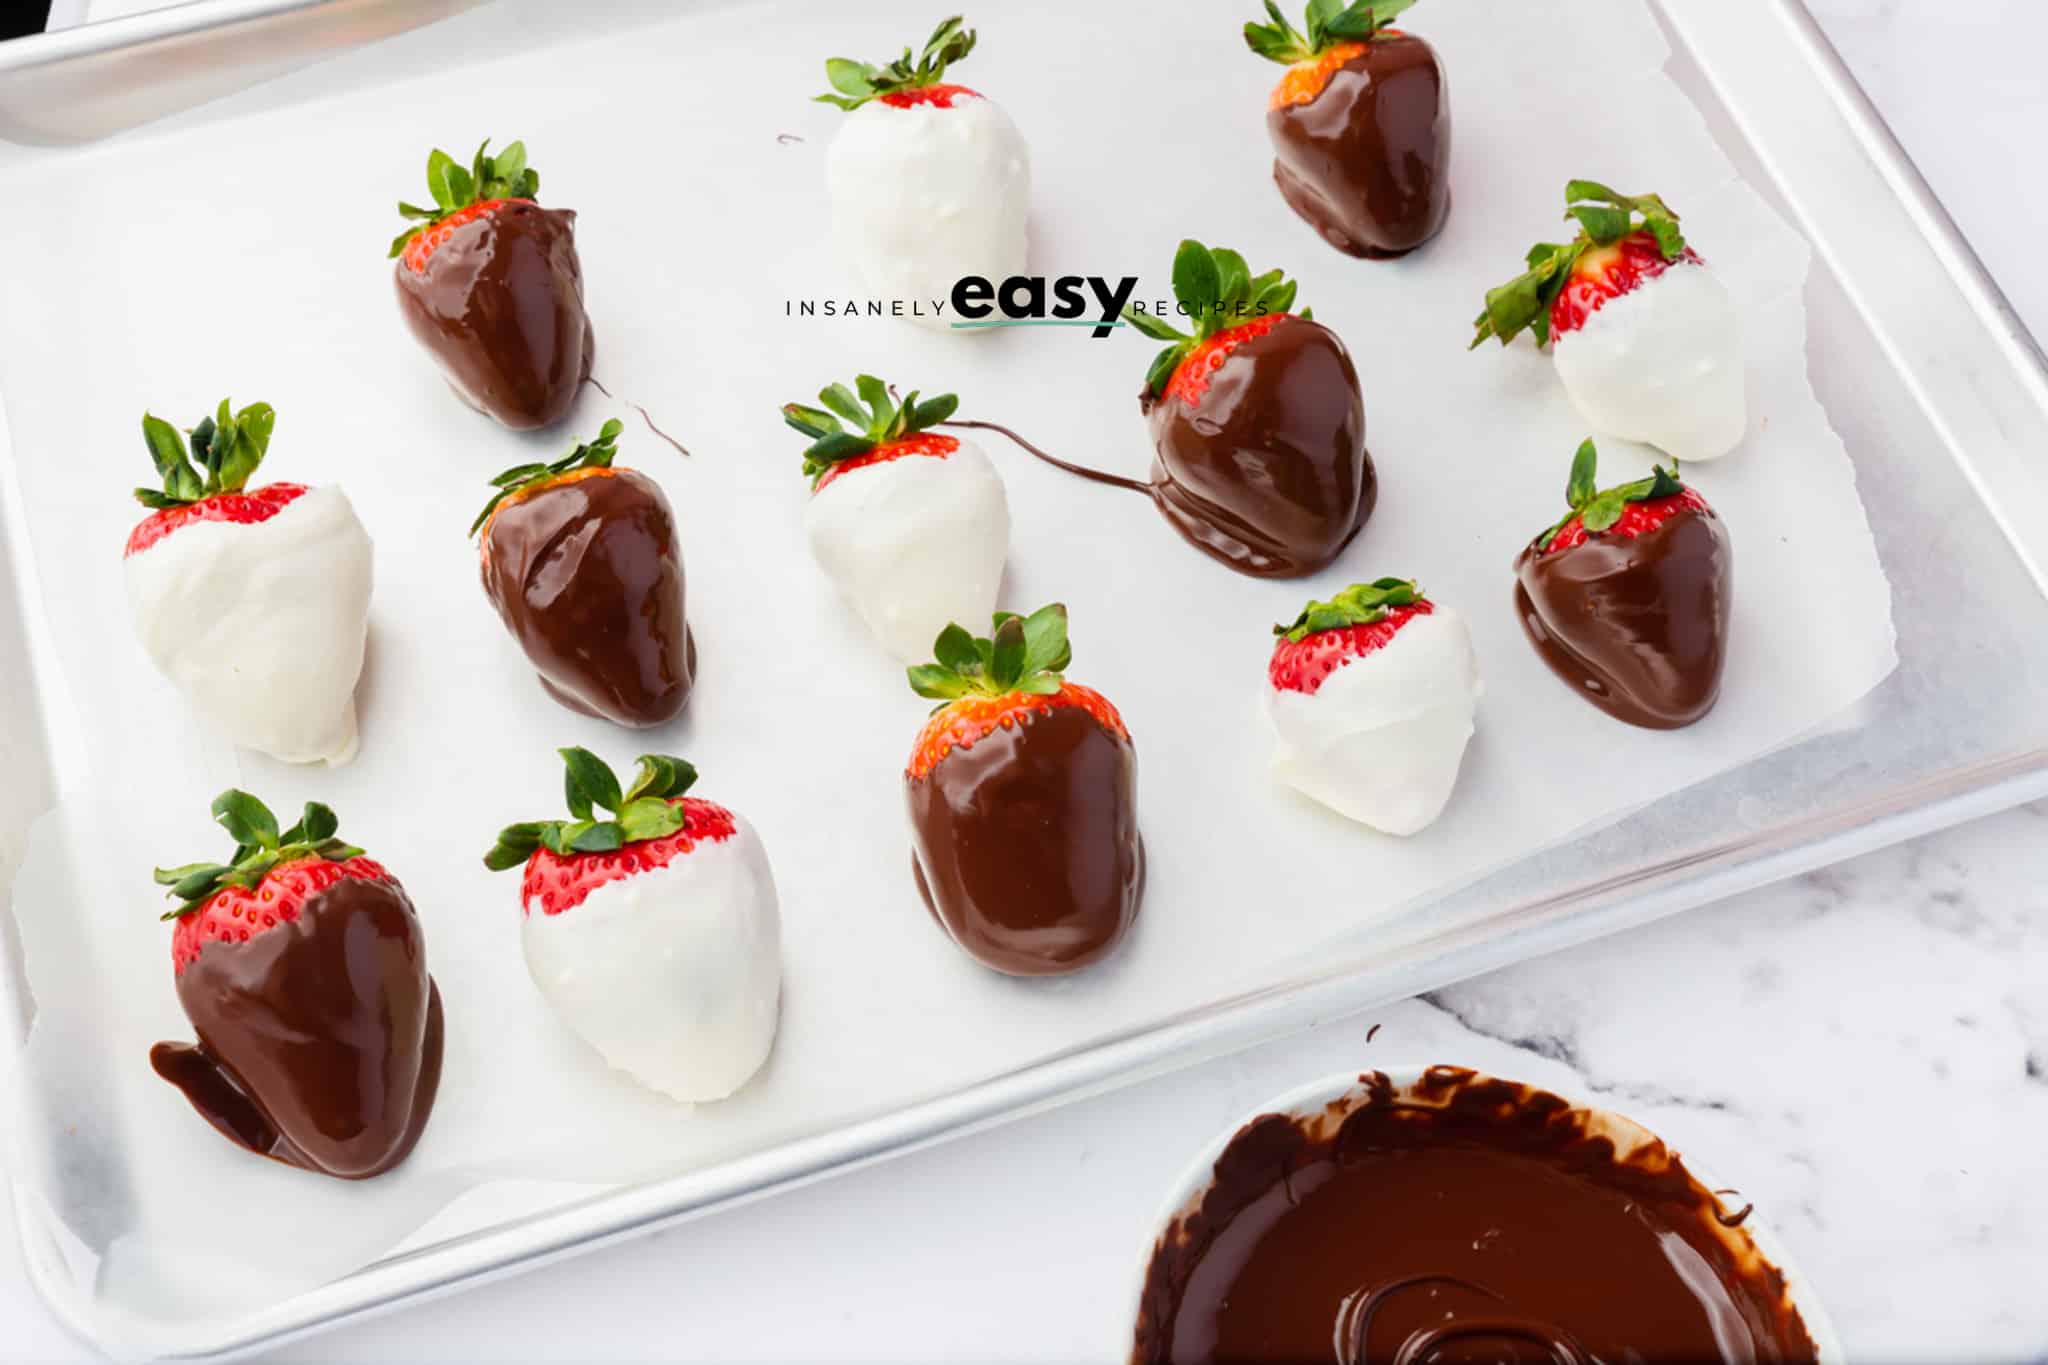 strawberries that have been dipped in white and brown chocolate on a white plate